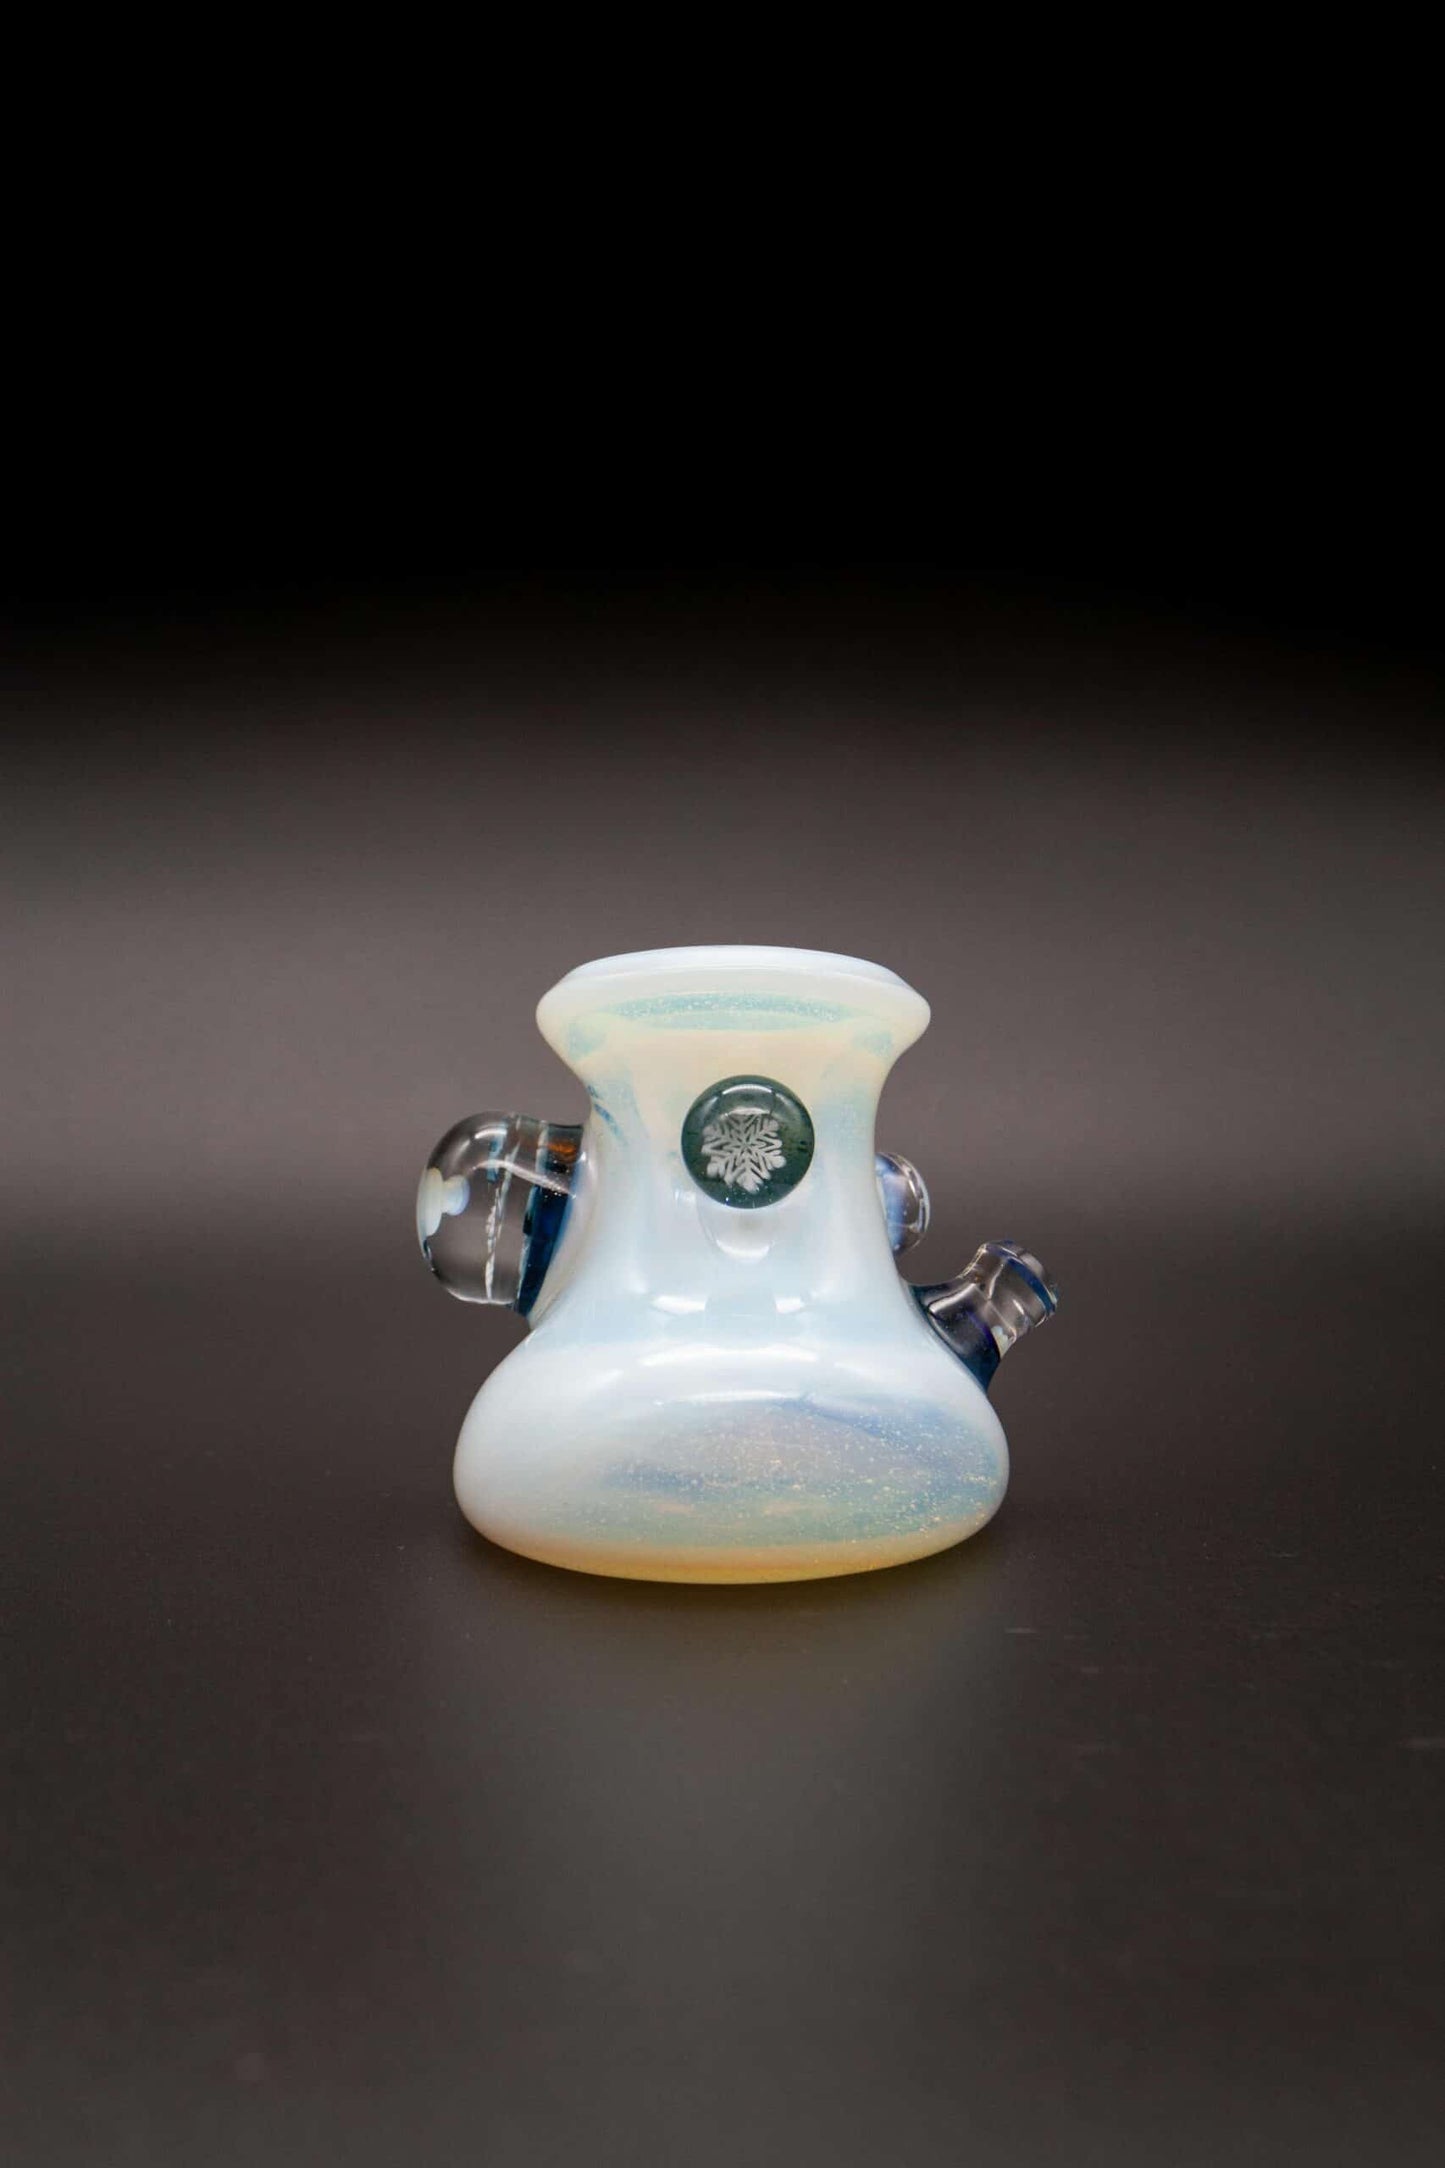 meticulously crafted art piece - Whiteout Dry Hammer by Chaka Glass